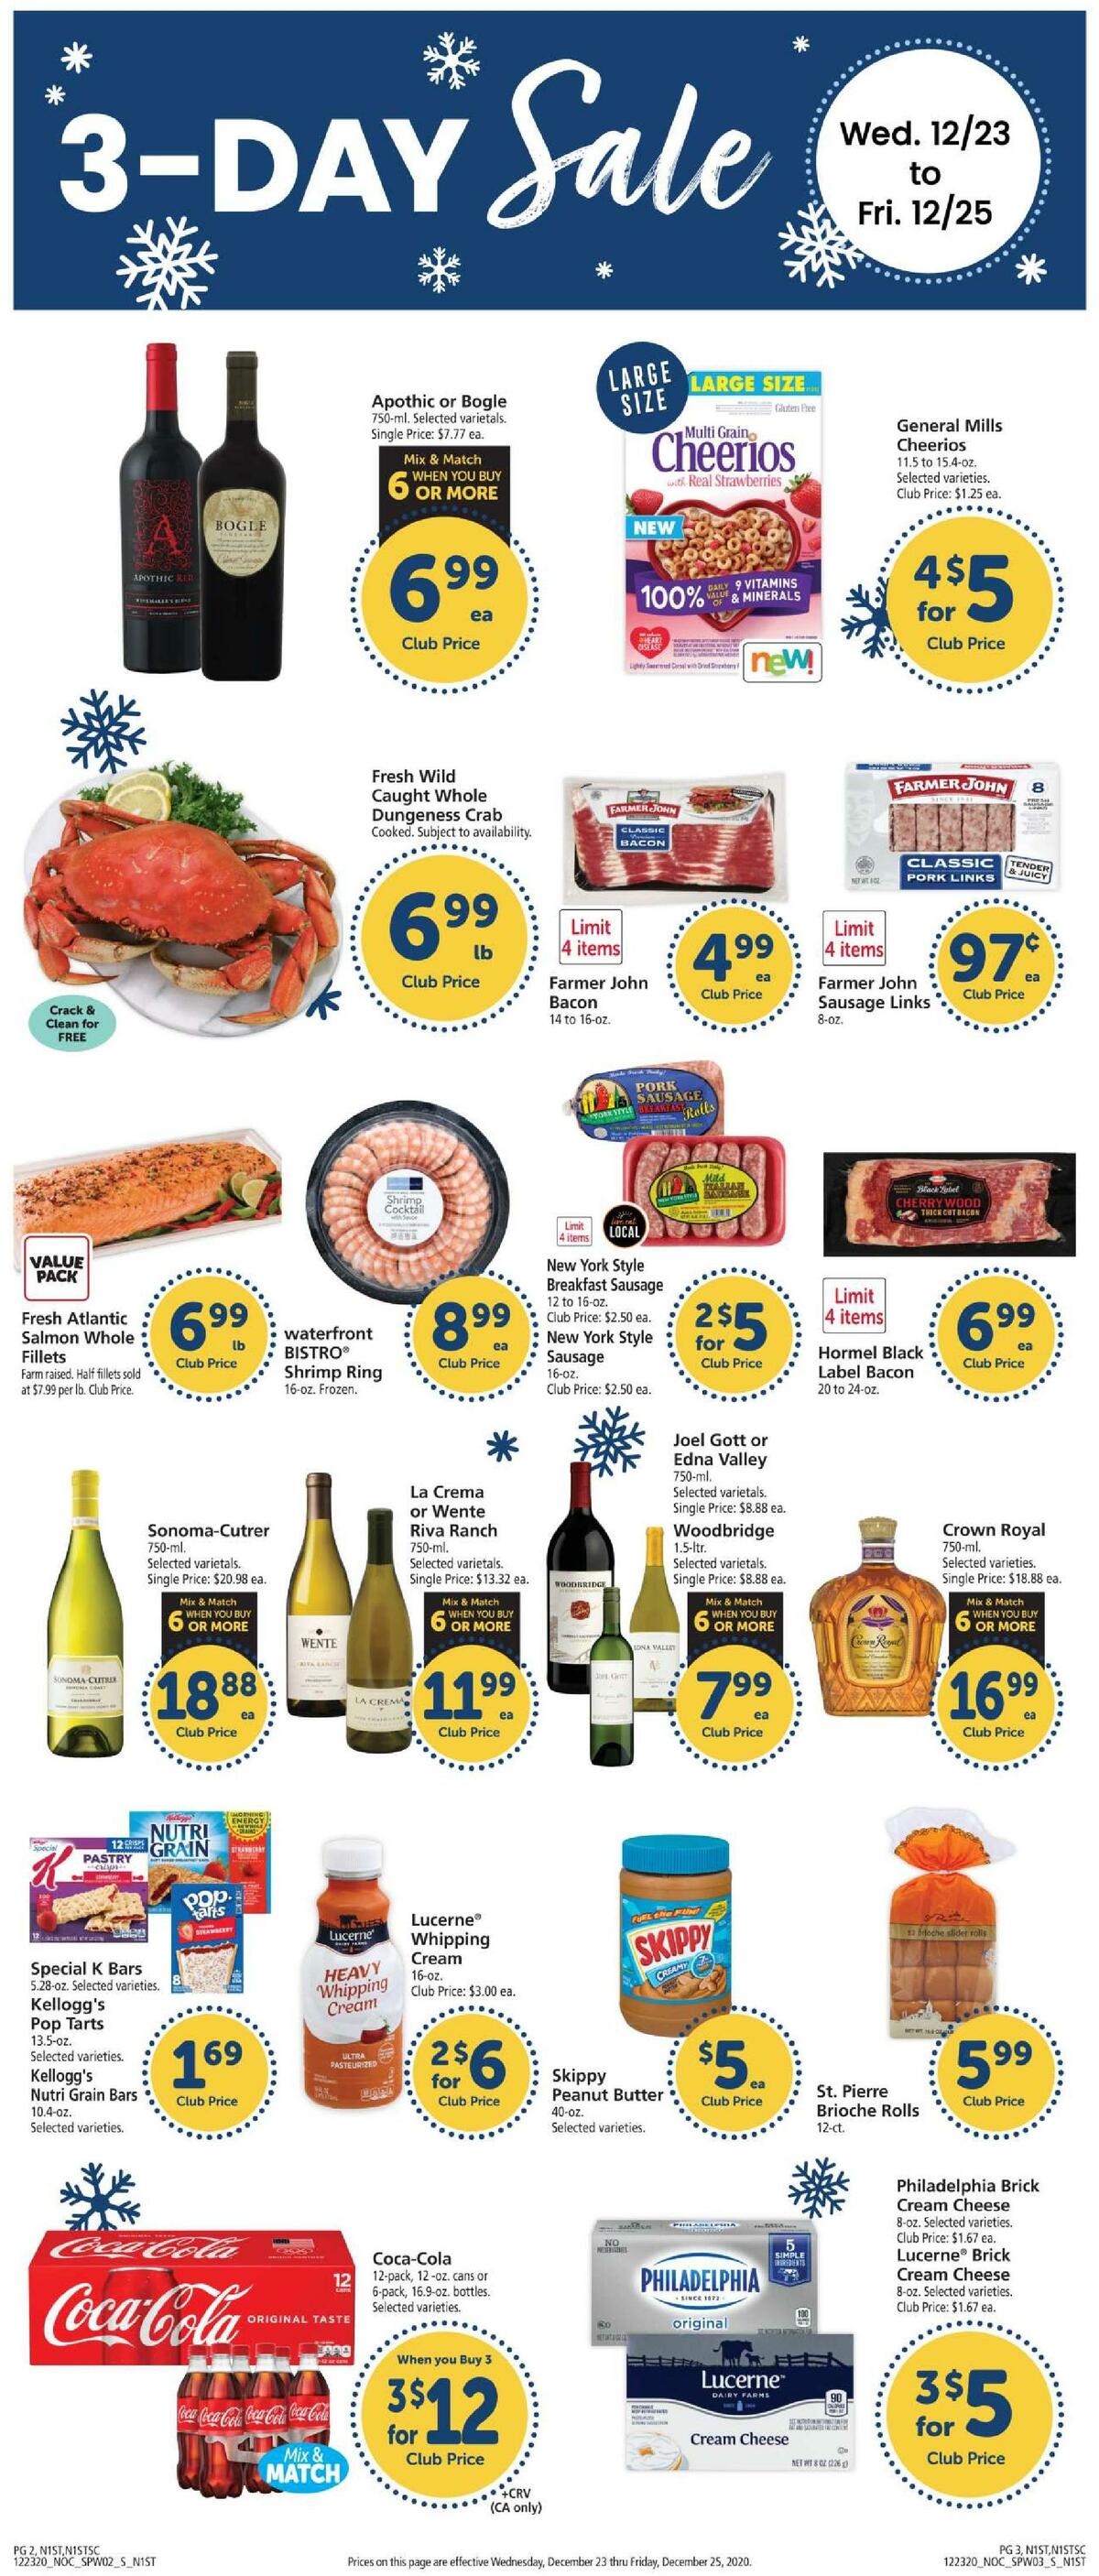 Safeway Weekly Ad from December 23